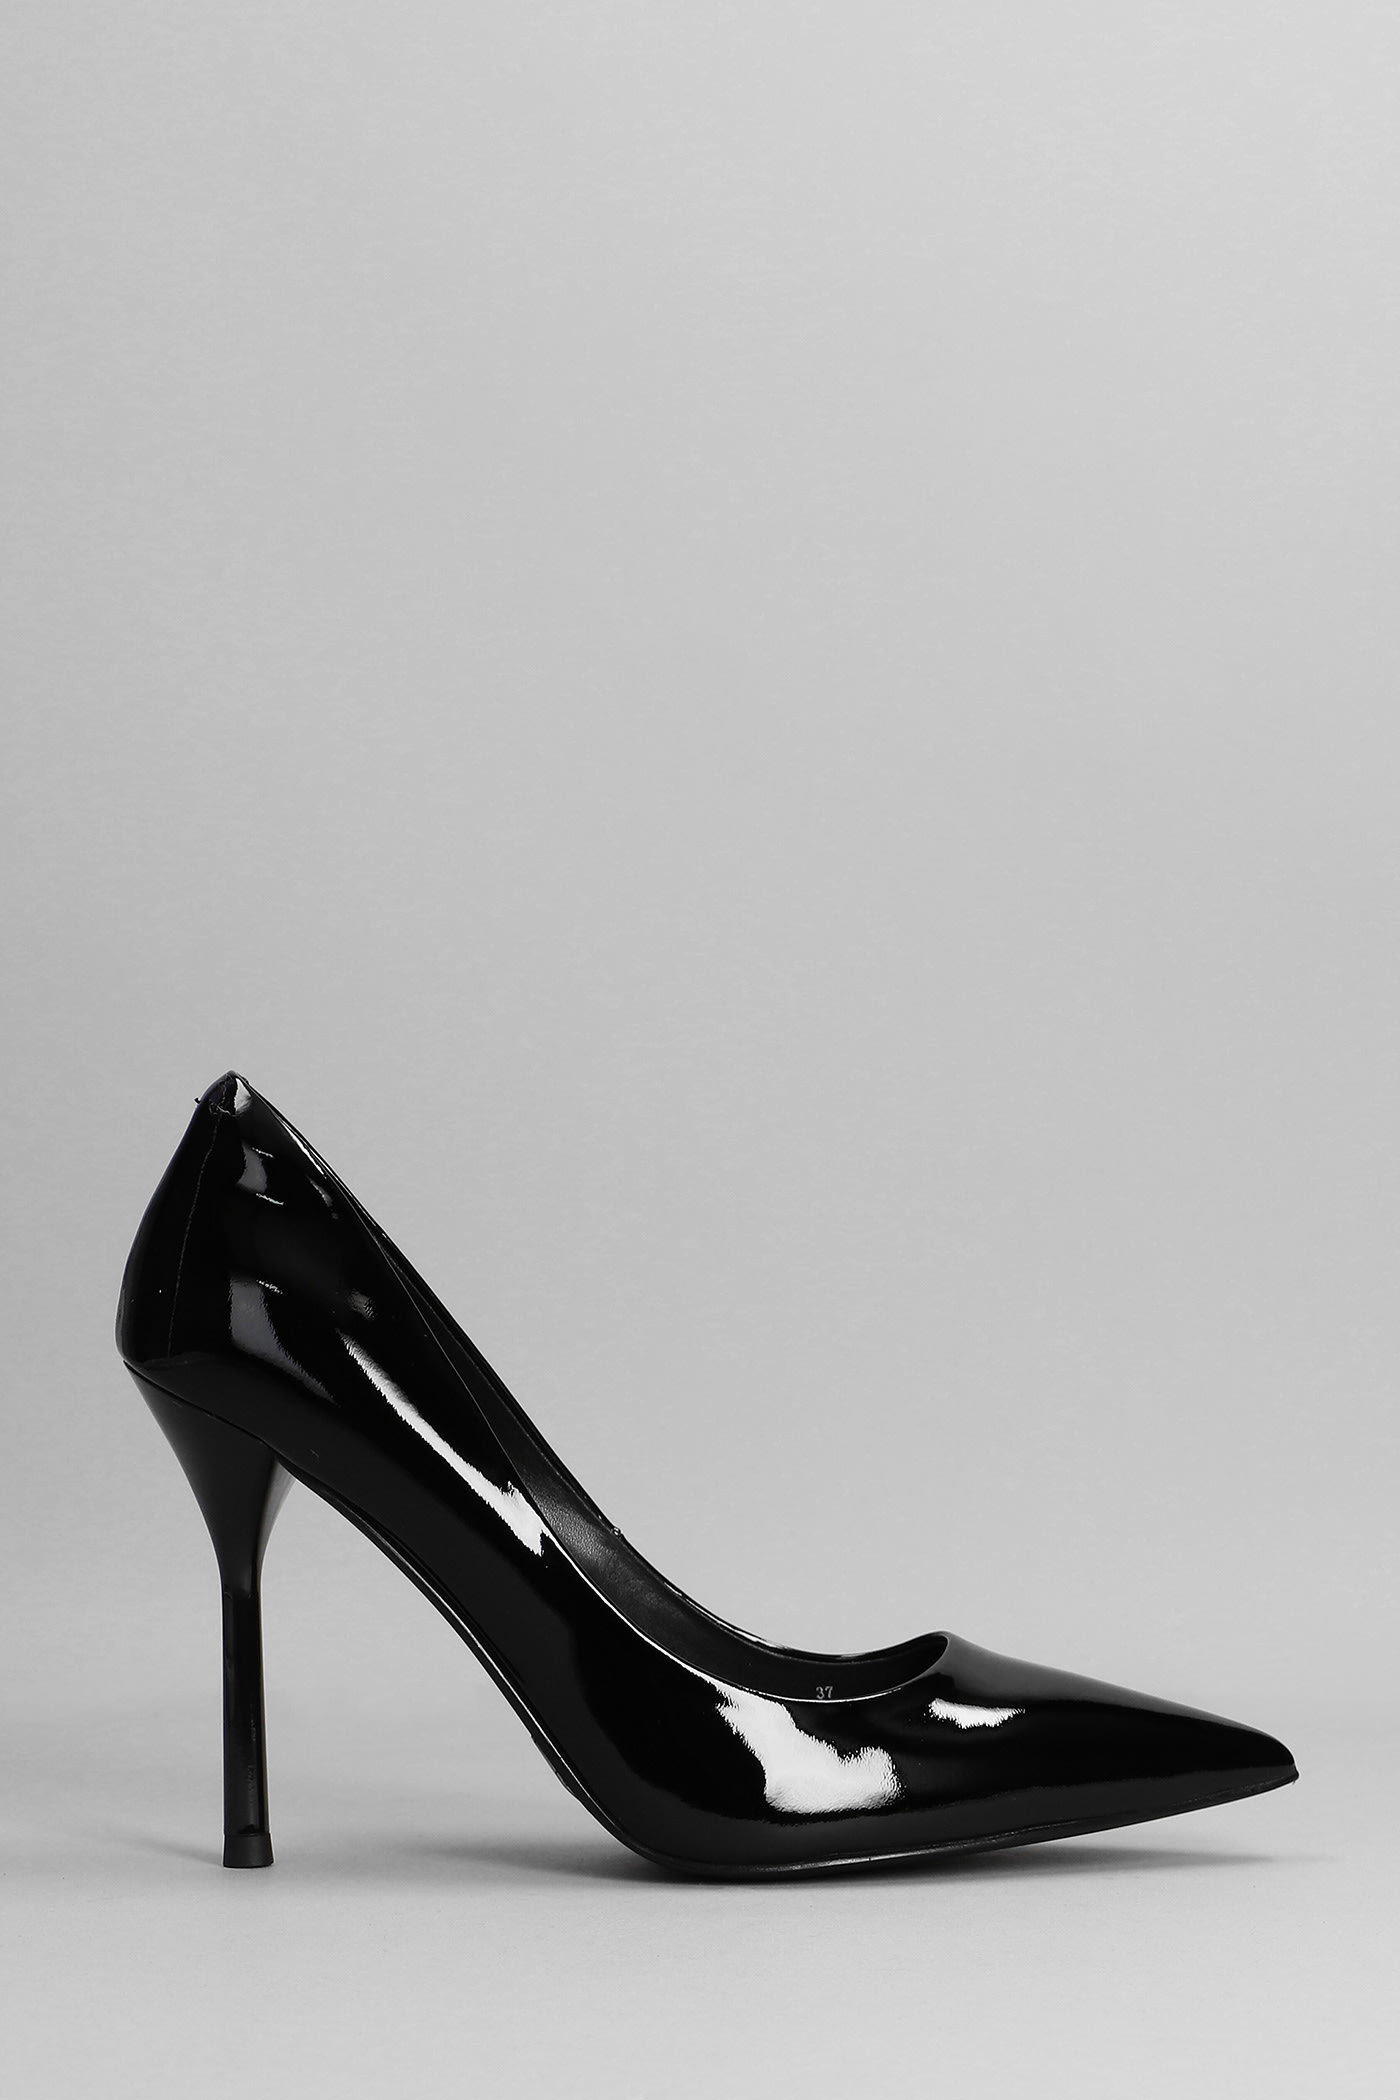 JEFFREY CAMPBELL TRIXY PUMPS IN BLACK PATENT LEATHER